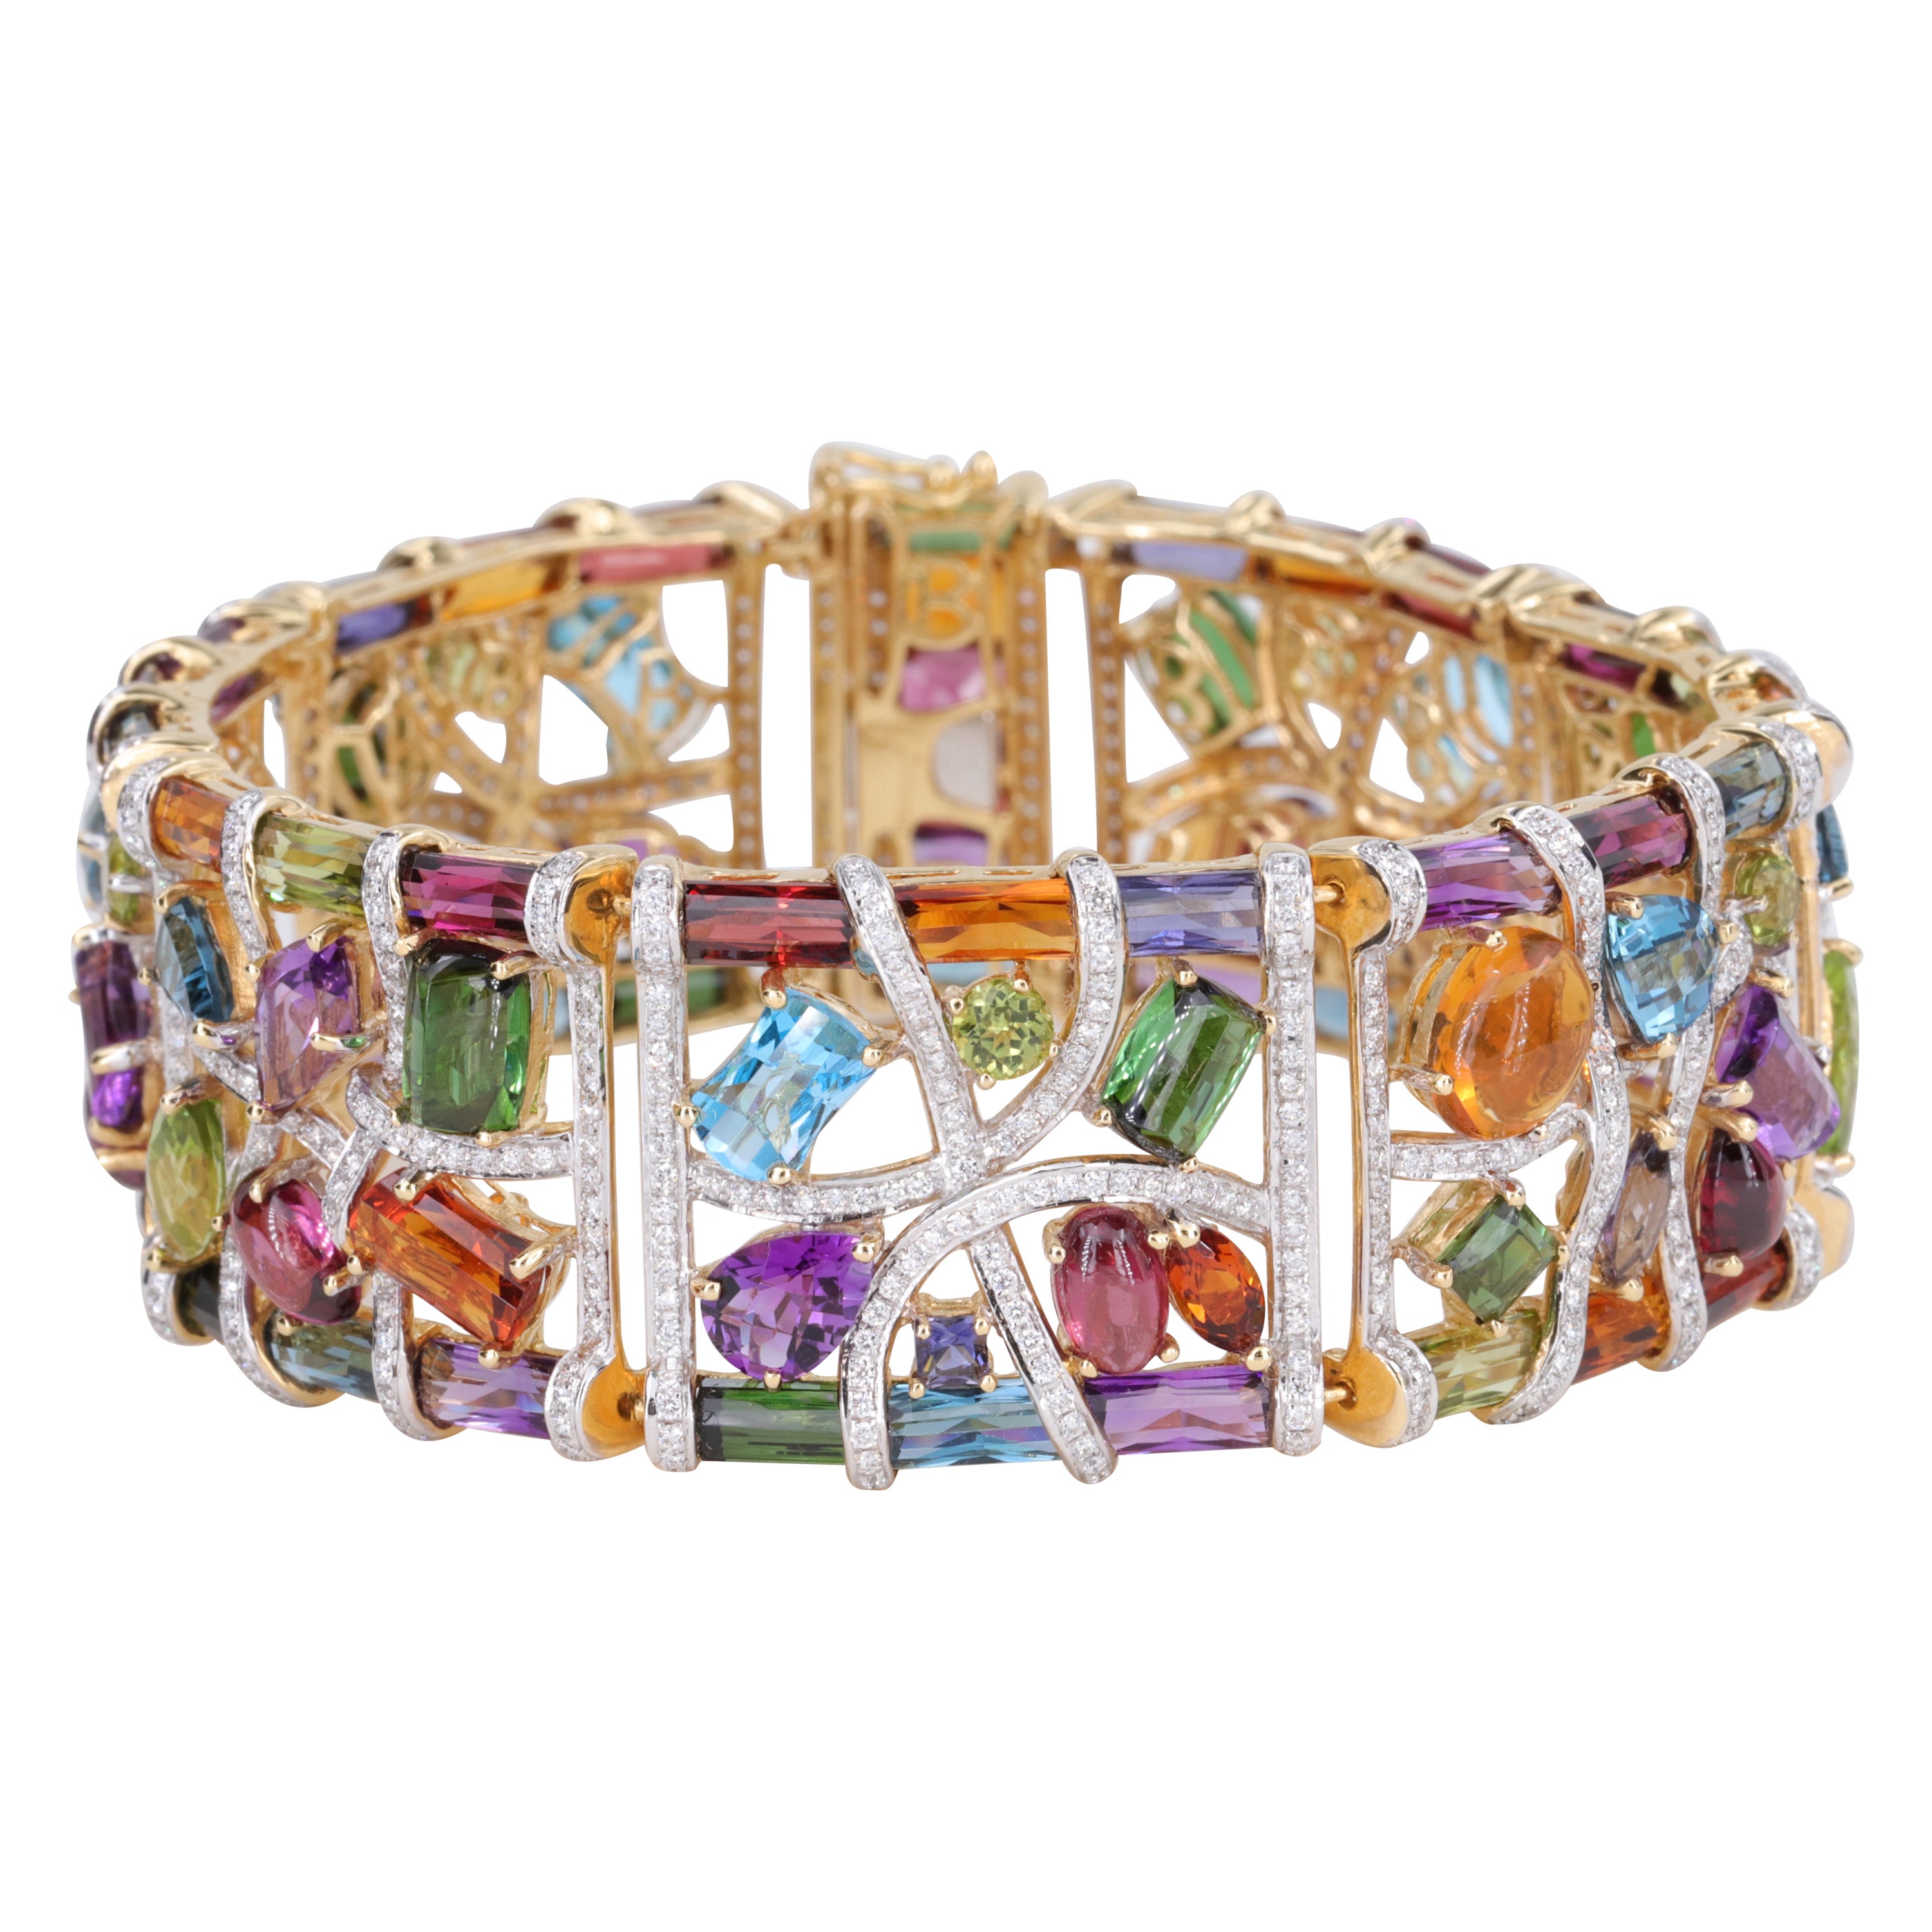 Bellarri Limited Edition Bracelet From The Marquesa Collection